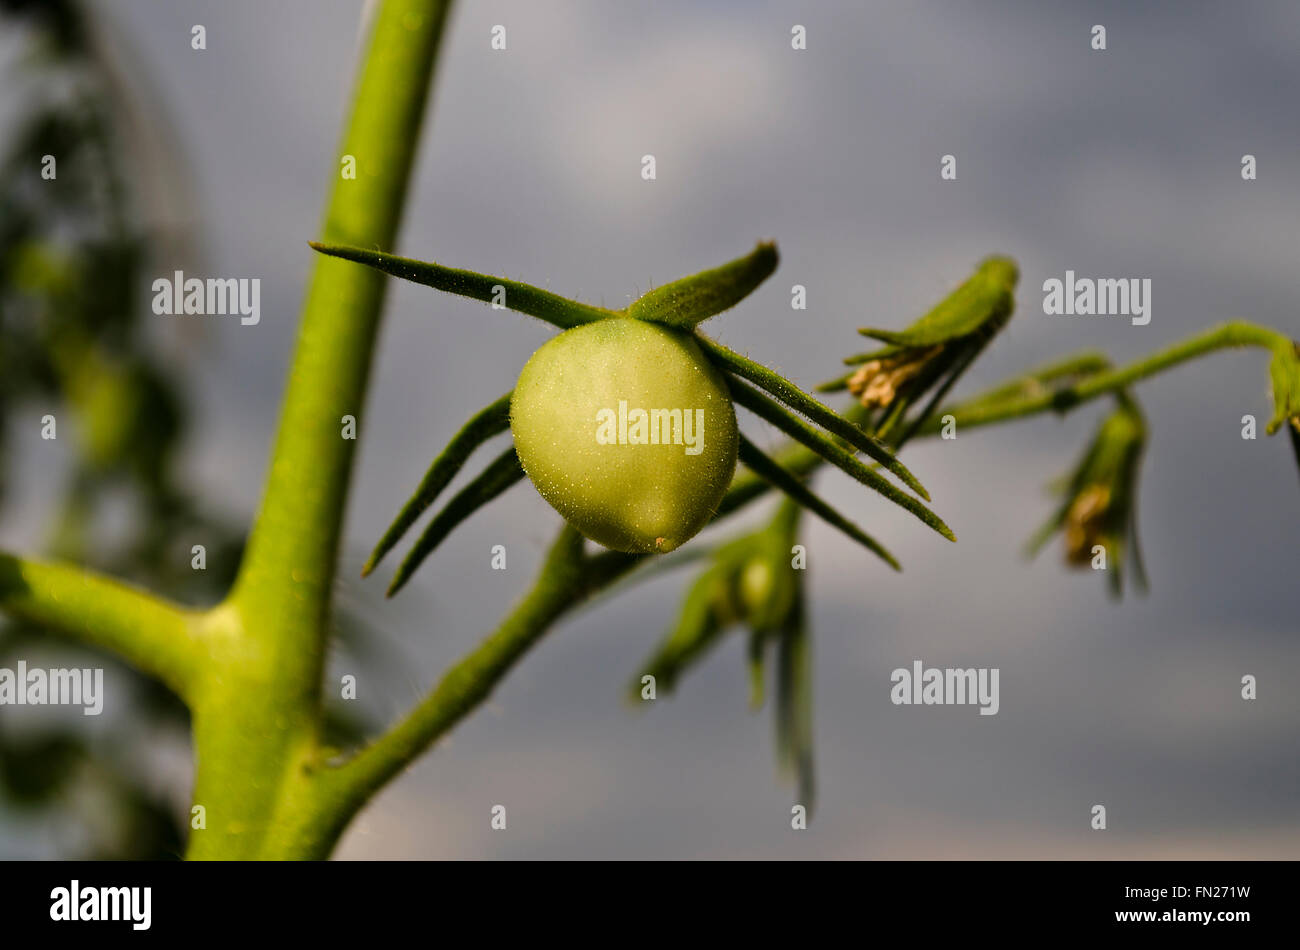 Green tomatoes growing on branches in the garden Stock Photo